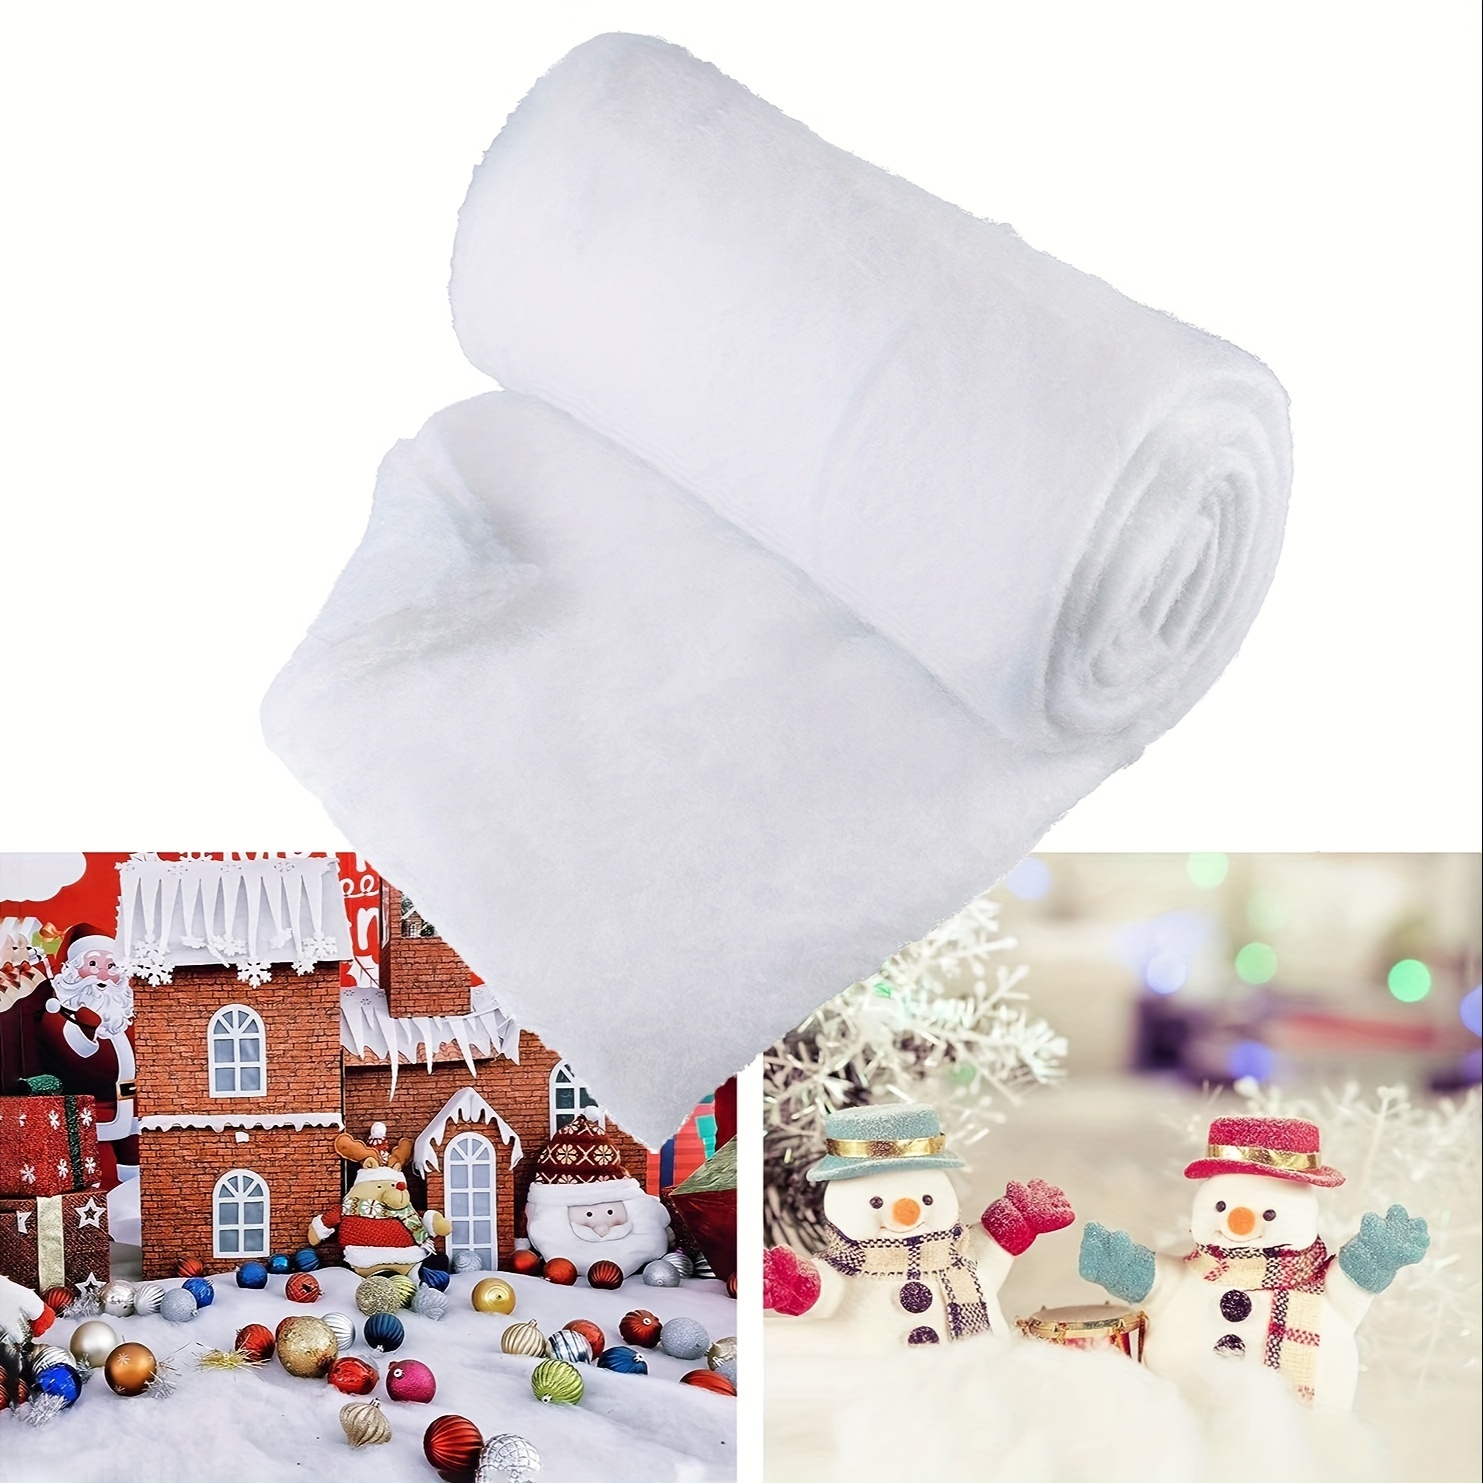 Snow for Christmas Village, Snow Blanket for Decorating, Fake Snow Decoration, Artificial Snow Blanket Roll for Christmas Tree Decorating (31.5in x